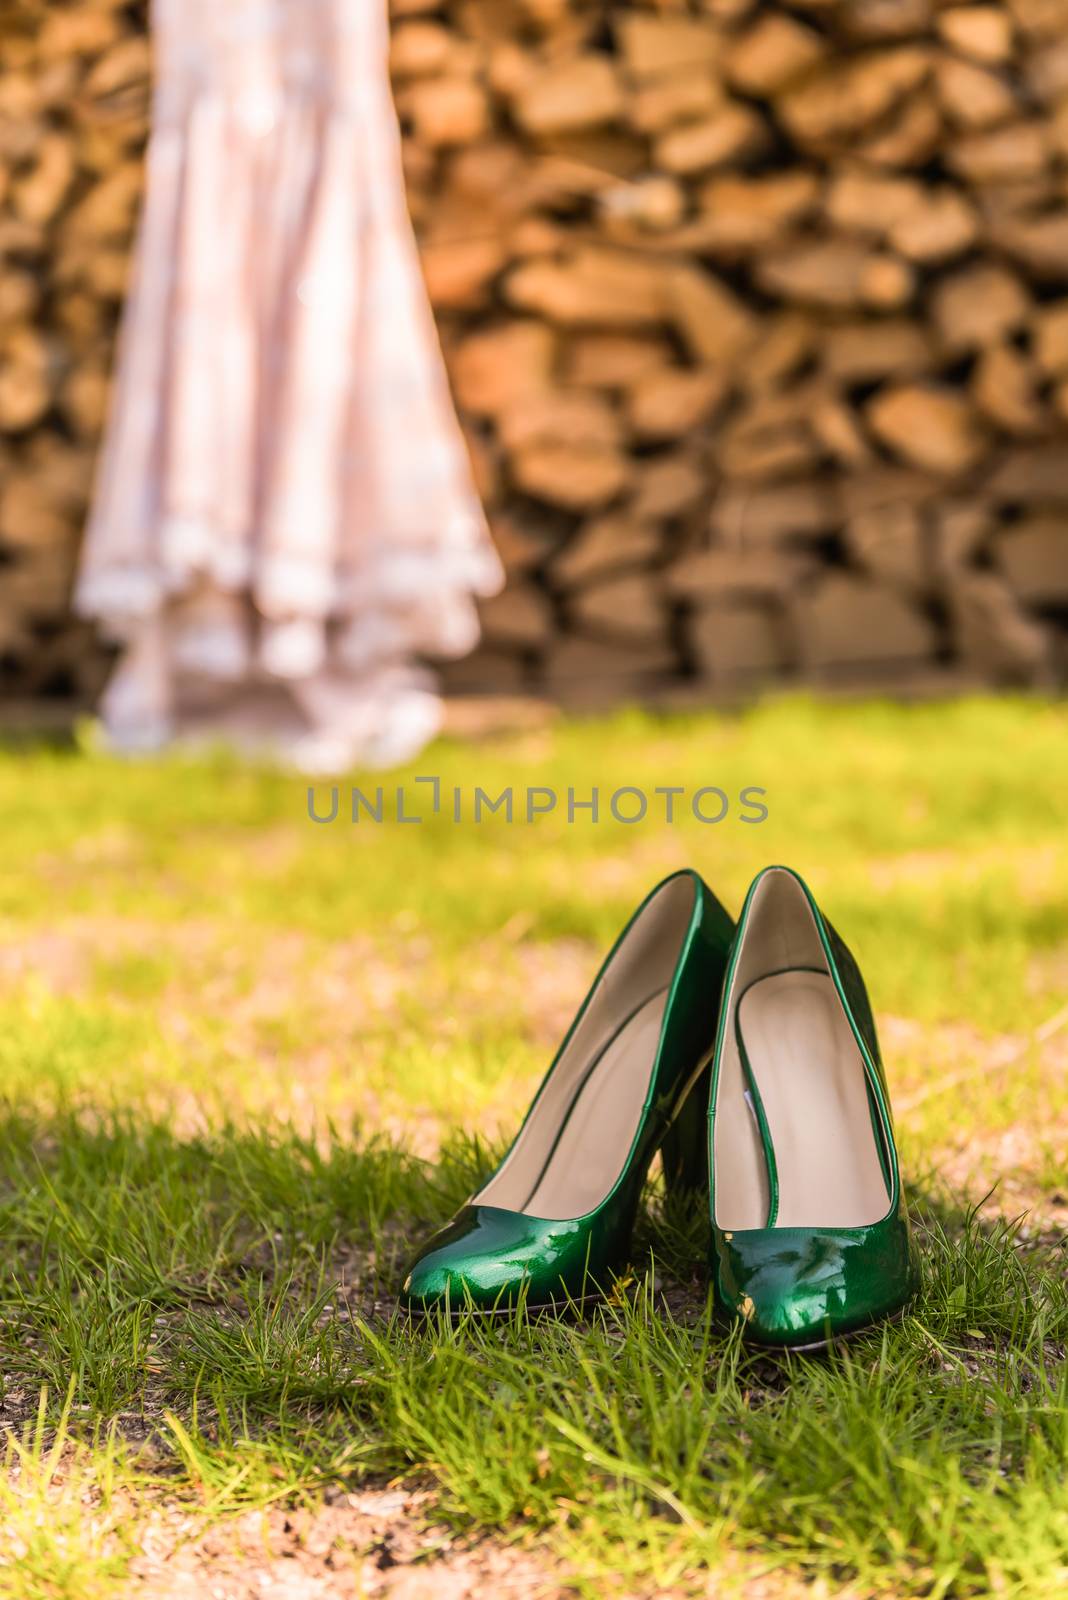 wedding emerald bridesmaid shoes on the green grass on the background of the dress